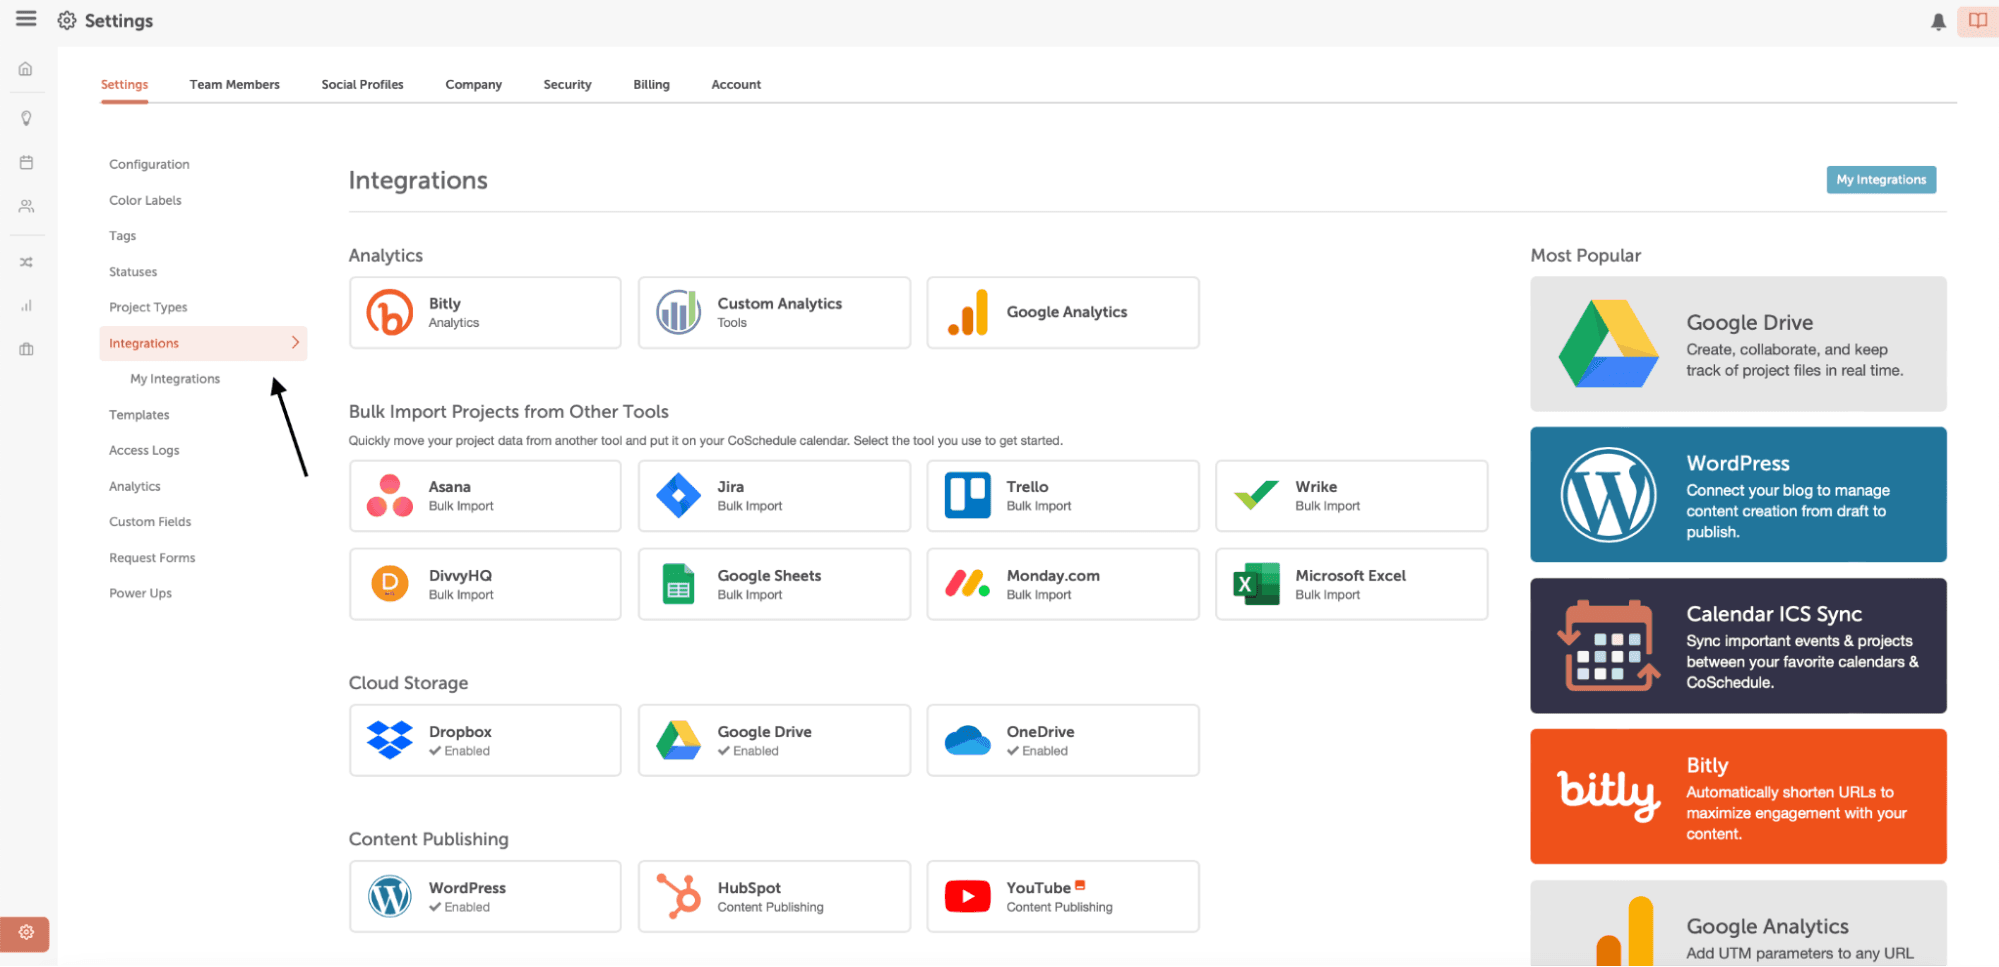 See all the integrations in settings.